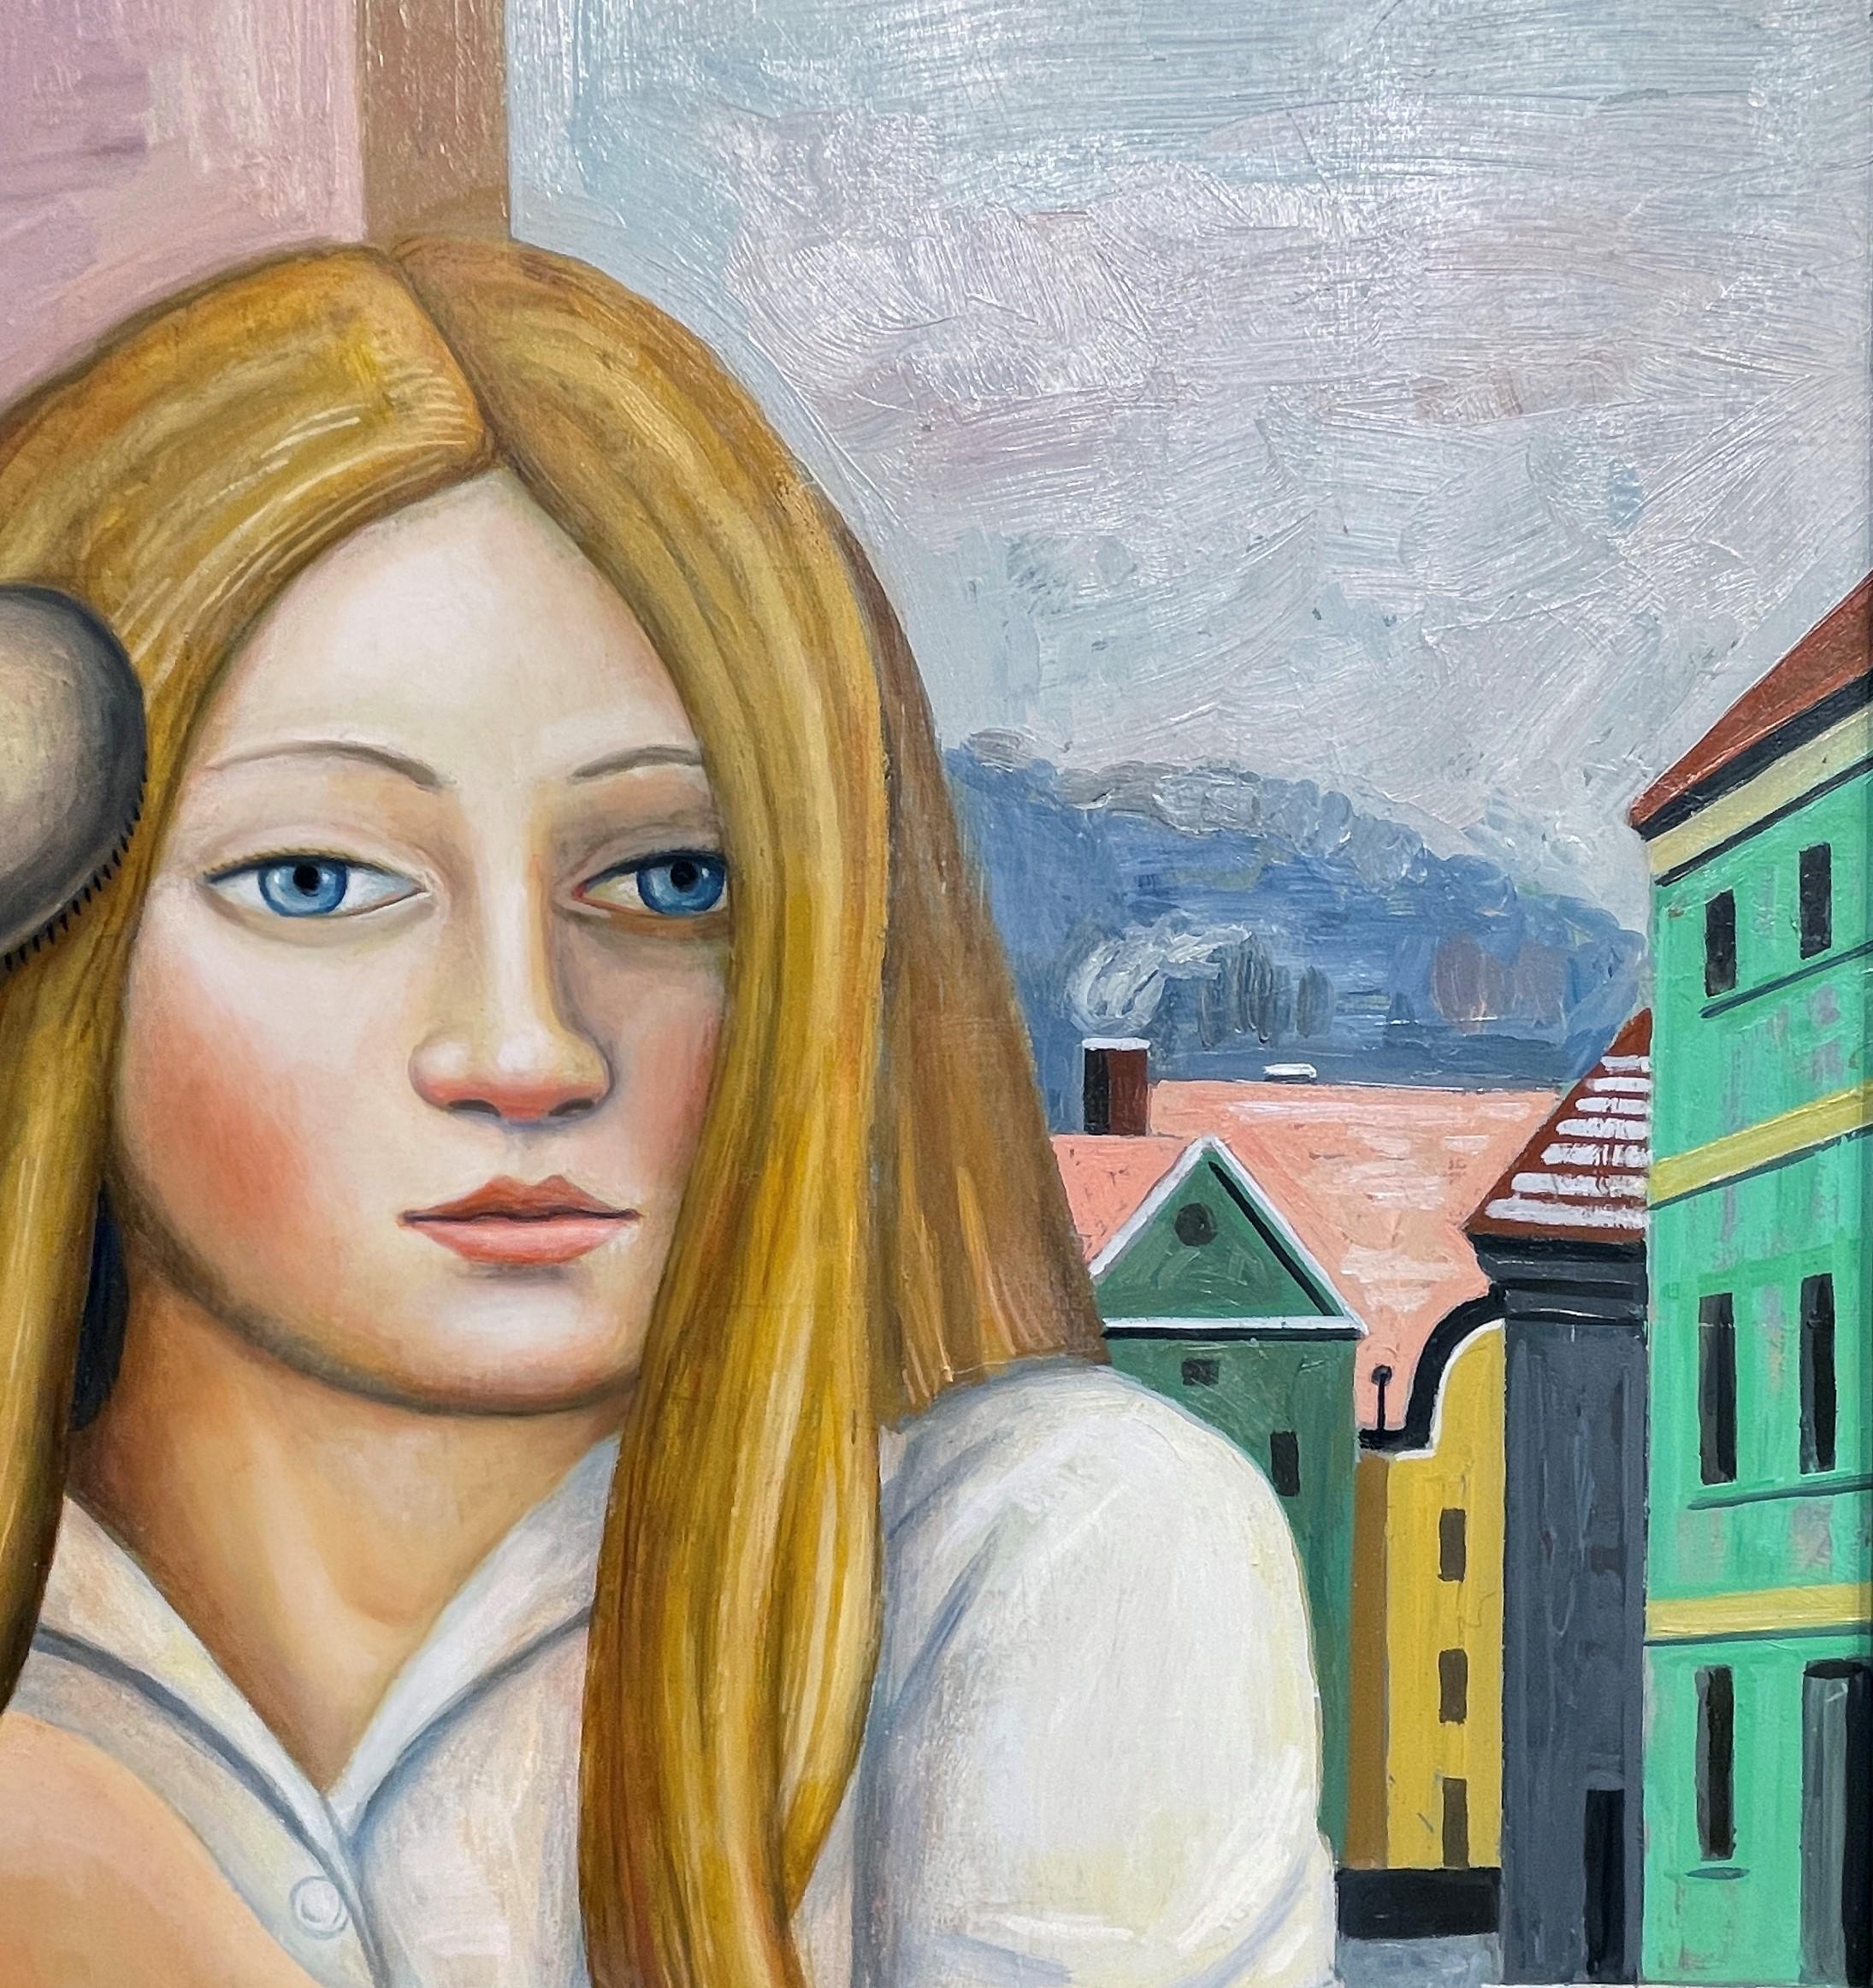 Brushing Her Hair - Portrait of a Young Woman with Various Objects and Window - Contemporary Painting by Rick Beerhorst